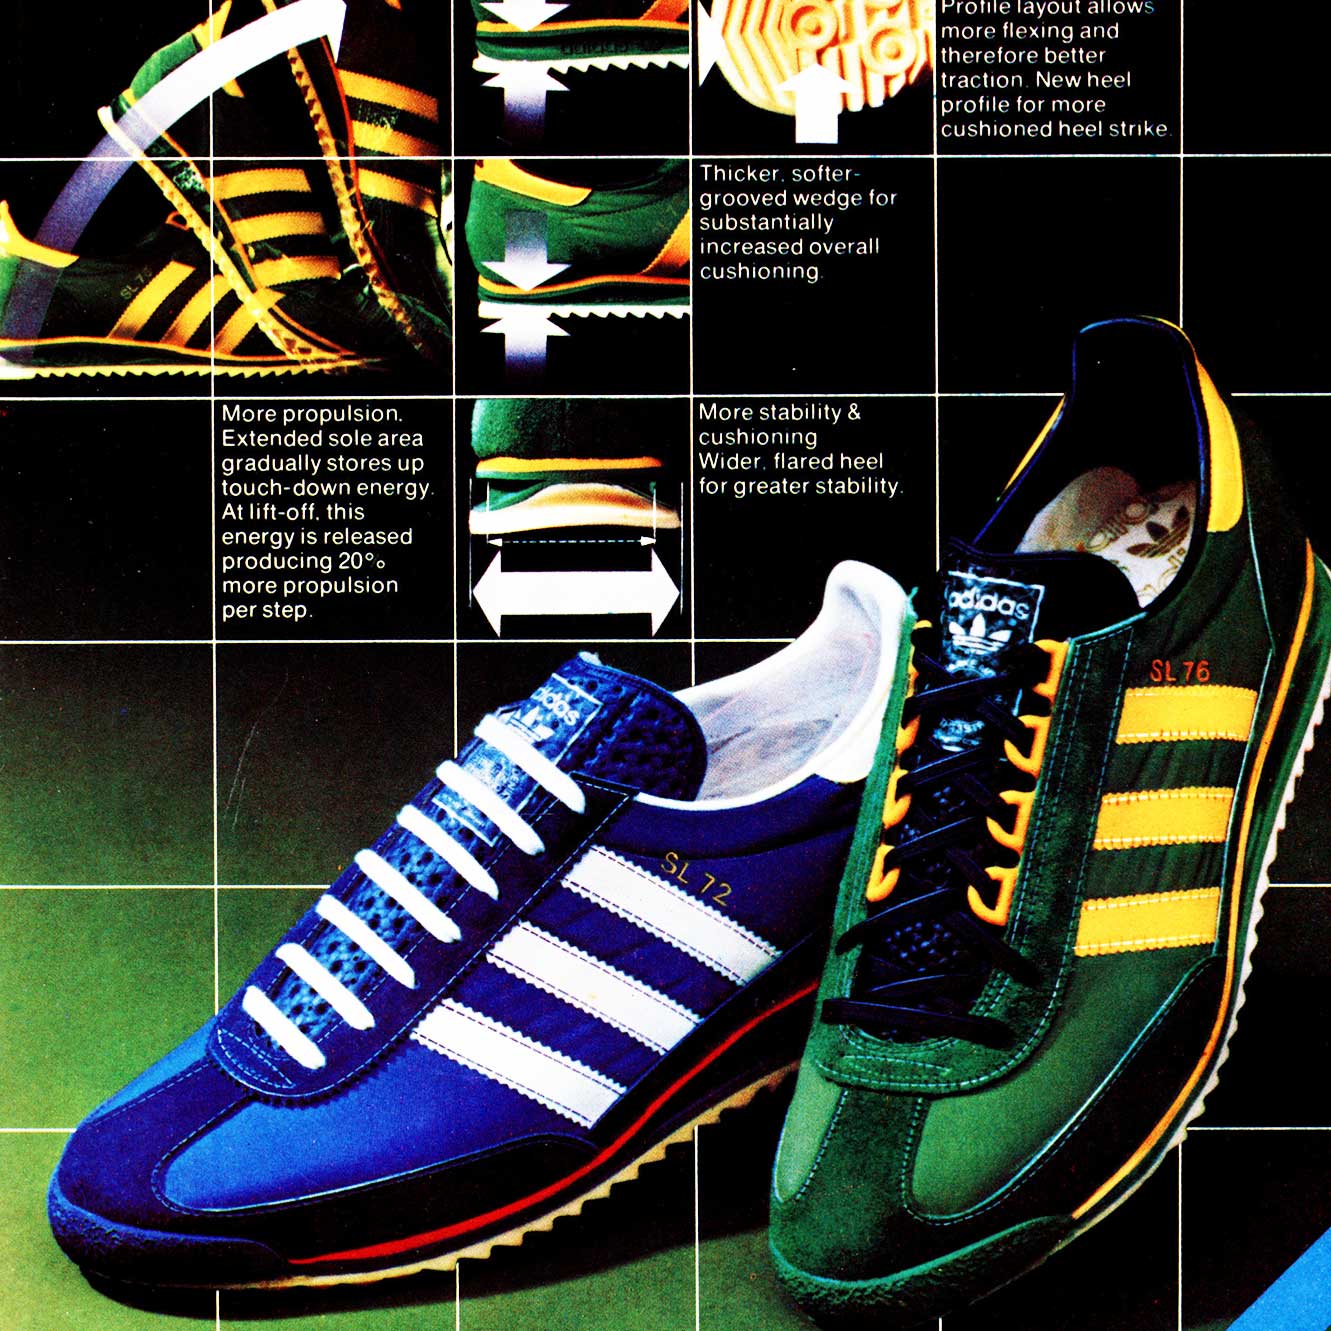 The Deffest®. A vintage and sneaker blog. — Adidas SL72 SL76 vintage sneaker ad